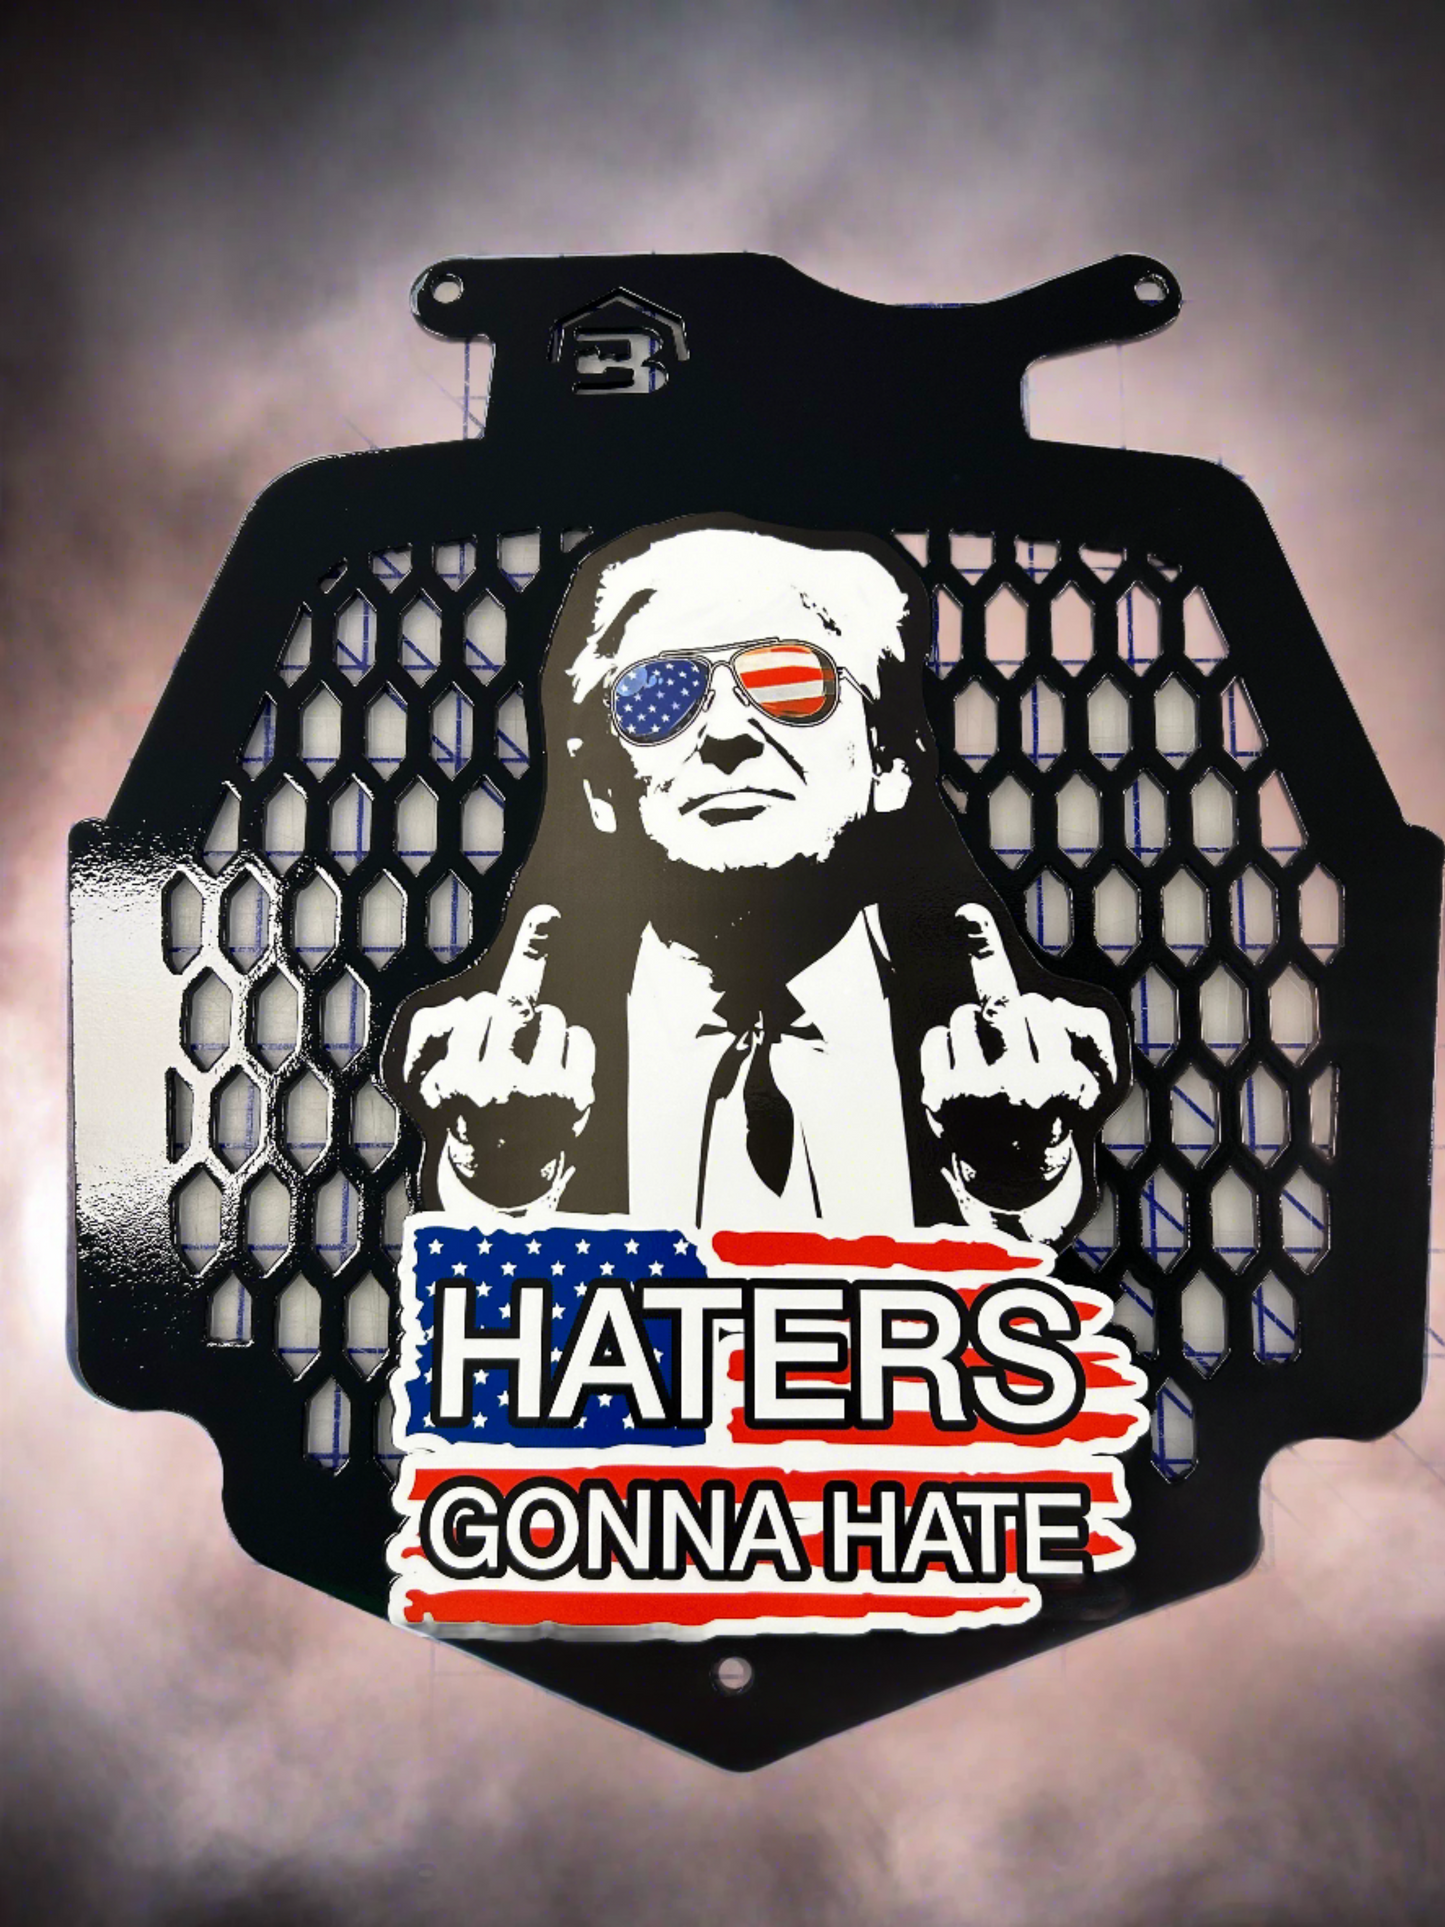 Haters Gonna Hate Radiator cover fits Can Am Outlander Max XMR 450 570 650 850 1000 - Your Color Choices